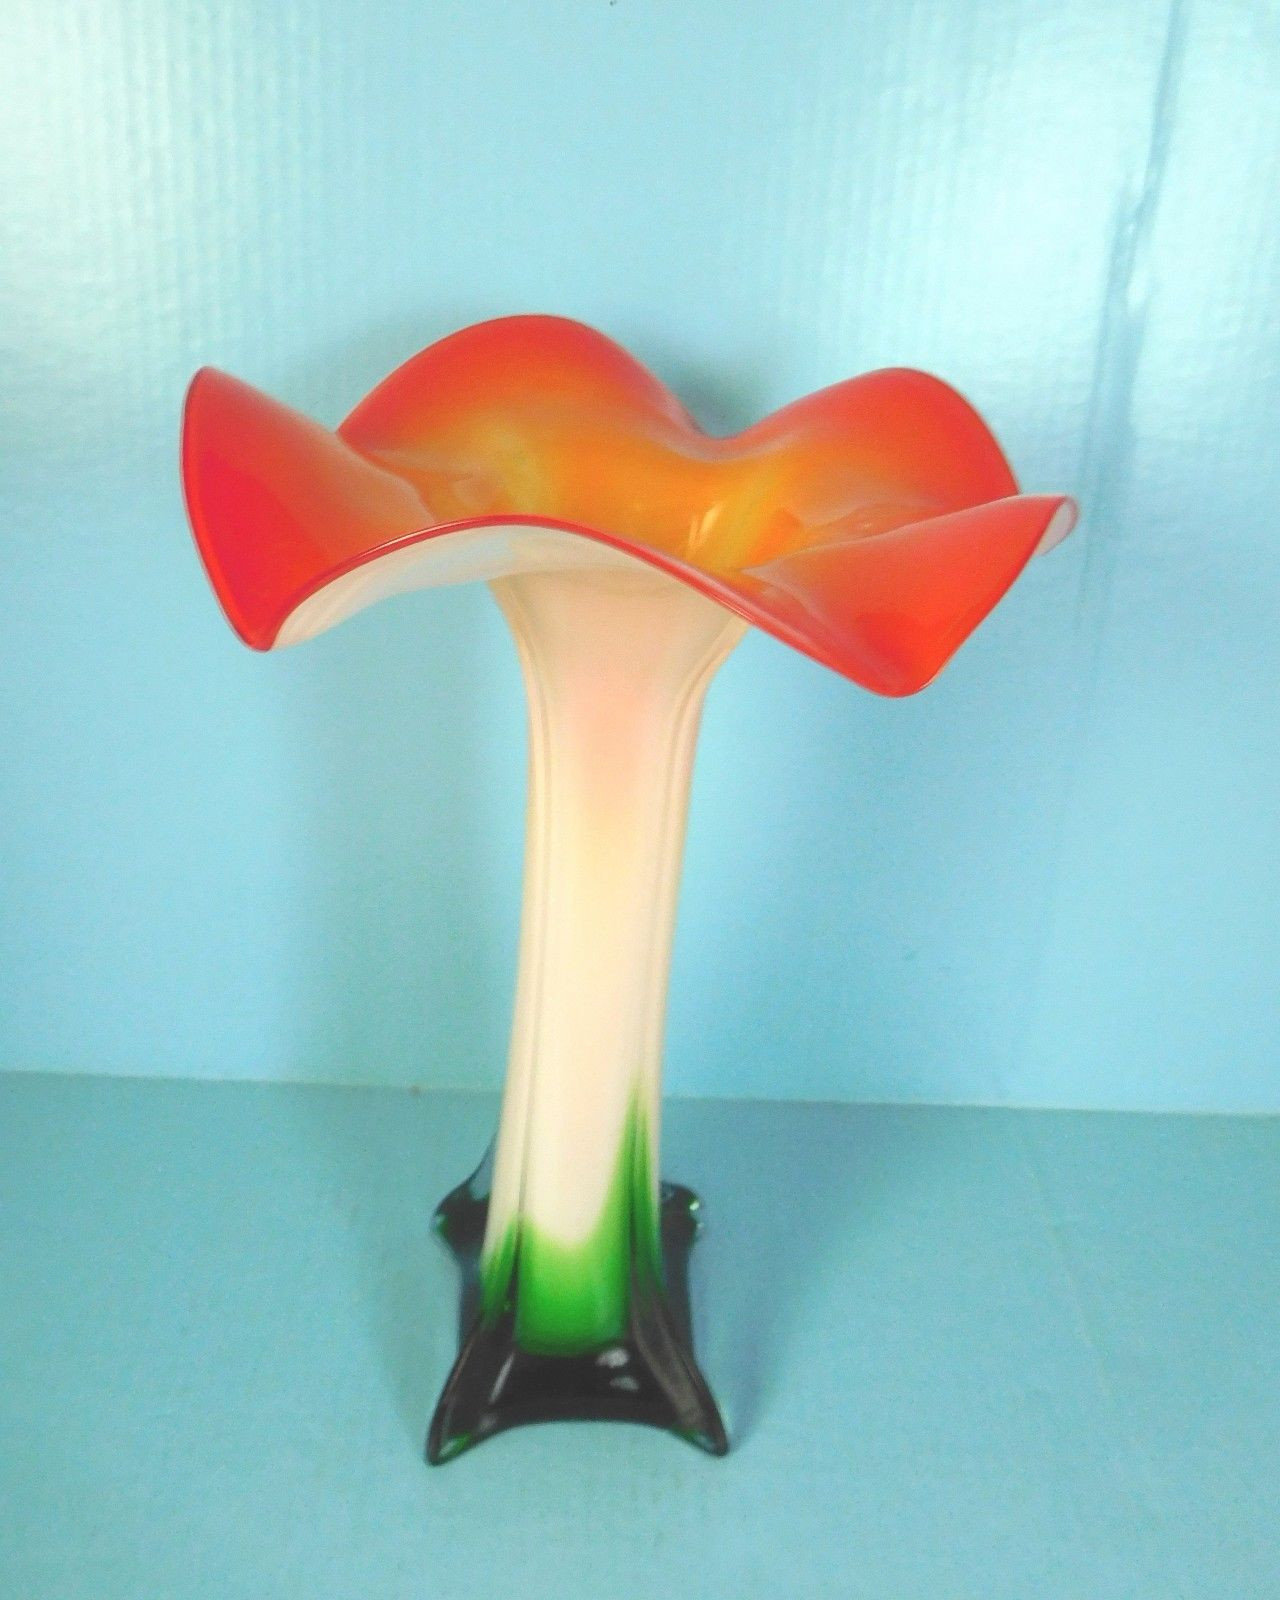 17 Stylish Lenox Crystal Star Vase 2023 free download lenox crystal star vase of flower petal retro art glass vase 14 25 tall poppy red green regarding 1 of 8 see more